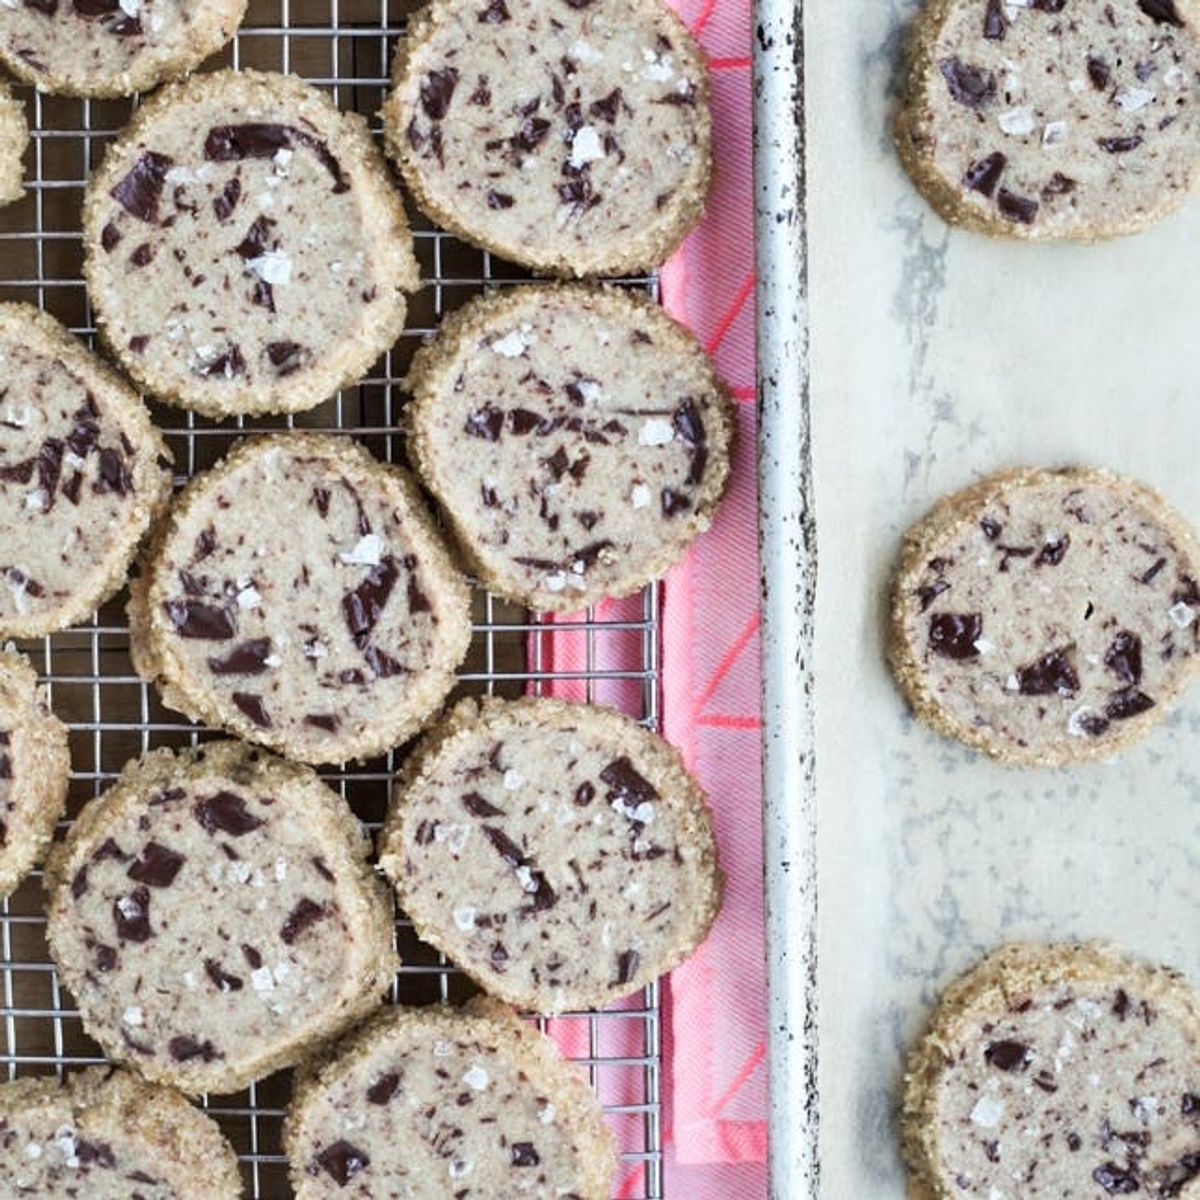 Try This Salted Chocolate Chunk Shortbread Cookies Recipe That’s All Over Your IG Feed